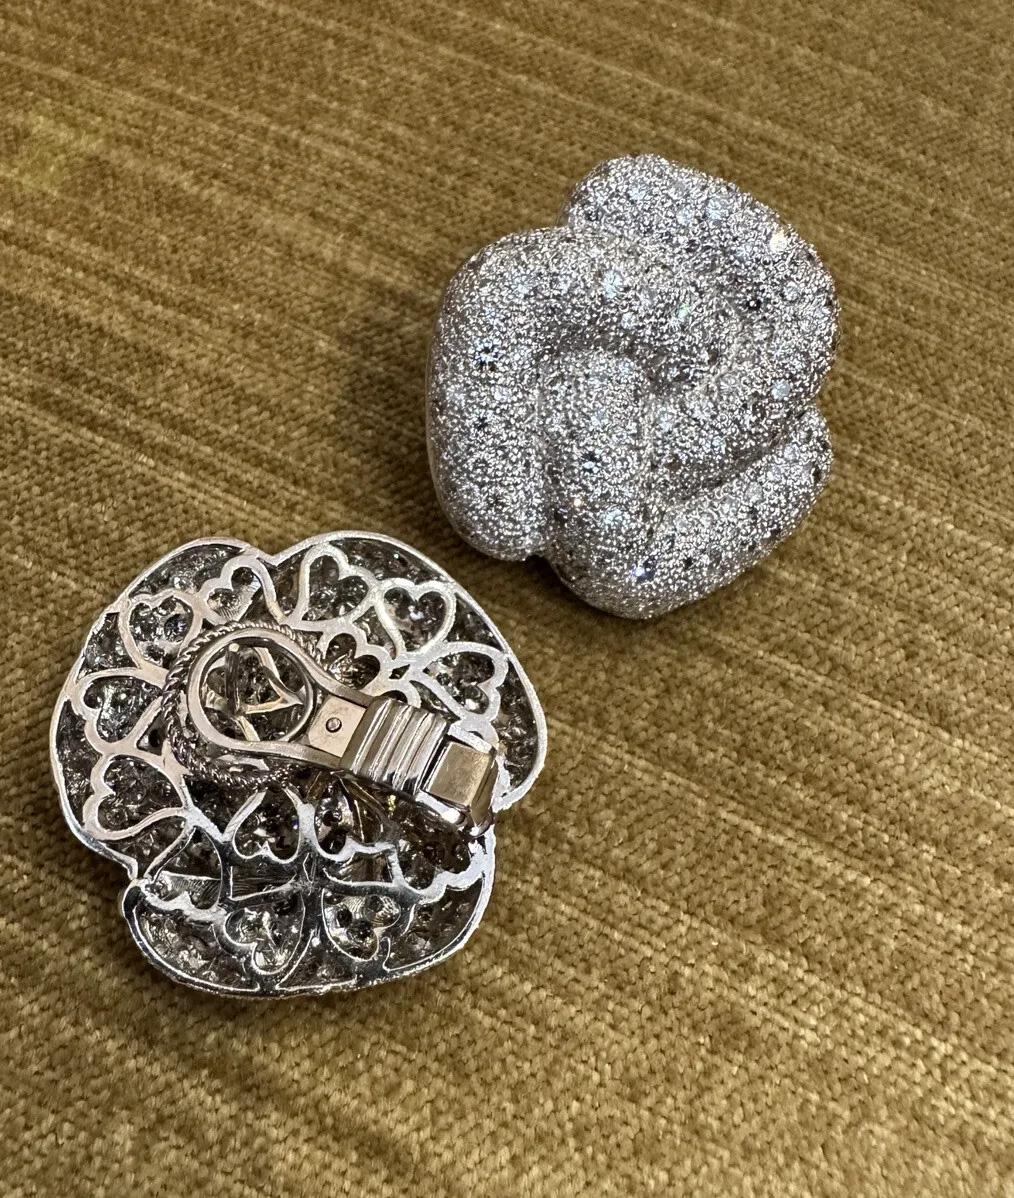 Large Pave Diamond Knot Earrings 10.00 Carat Total Weight in 18k/14k White Gold In Excellent Condition For Sale In La Jolla, CA